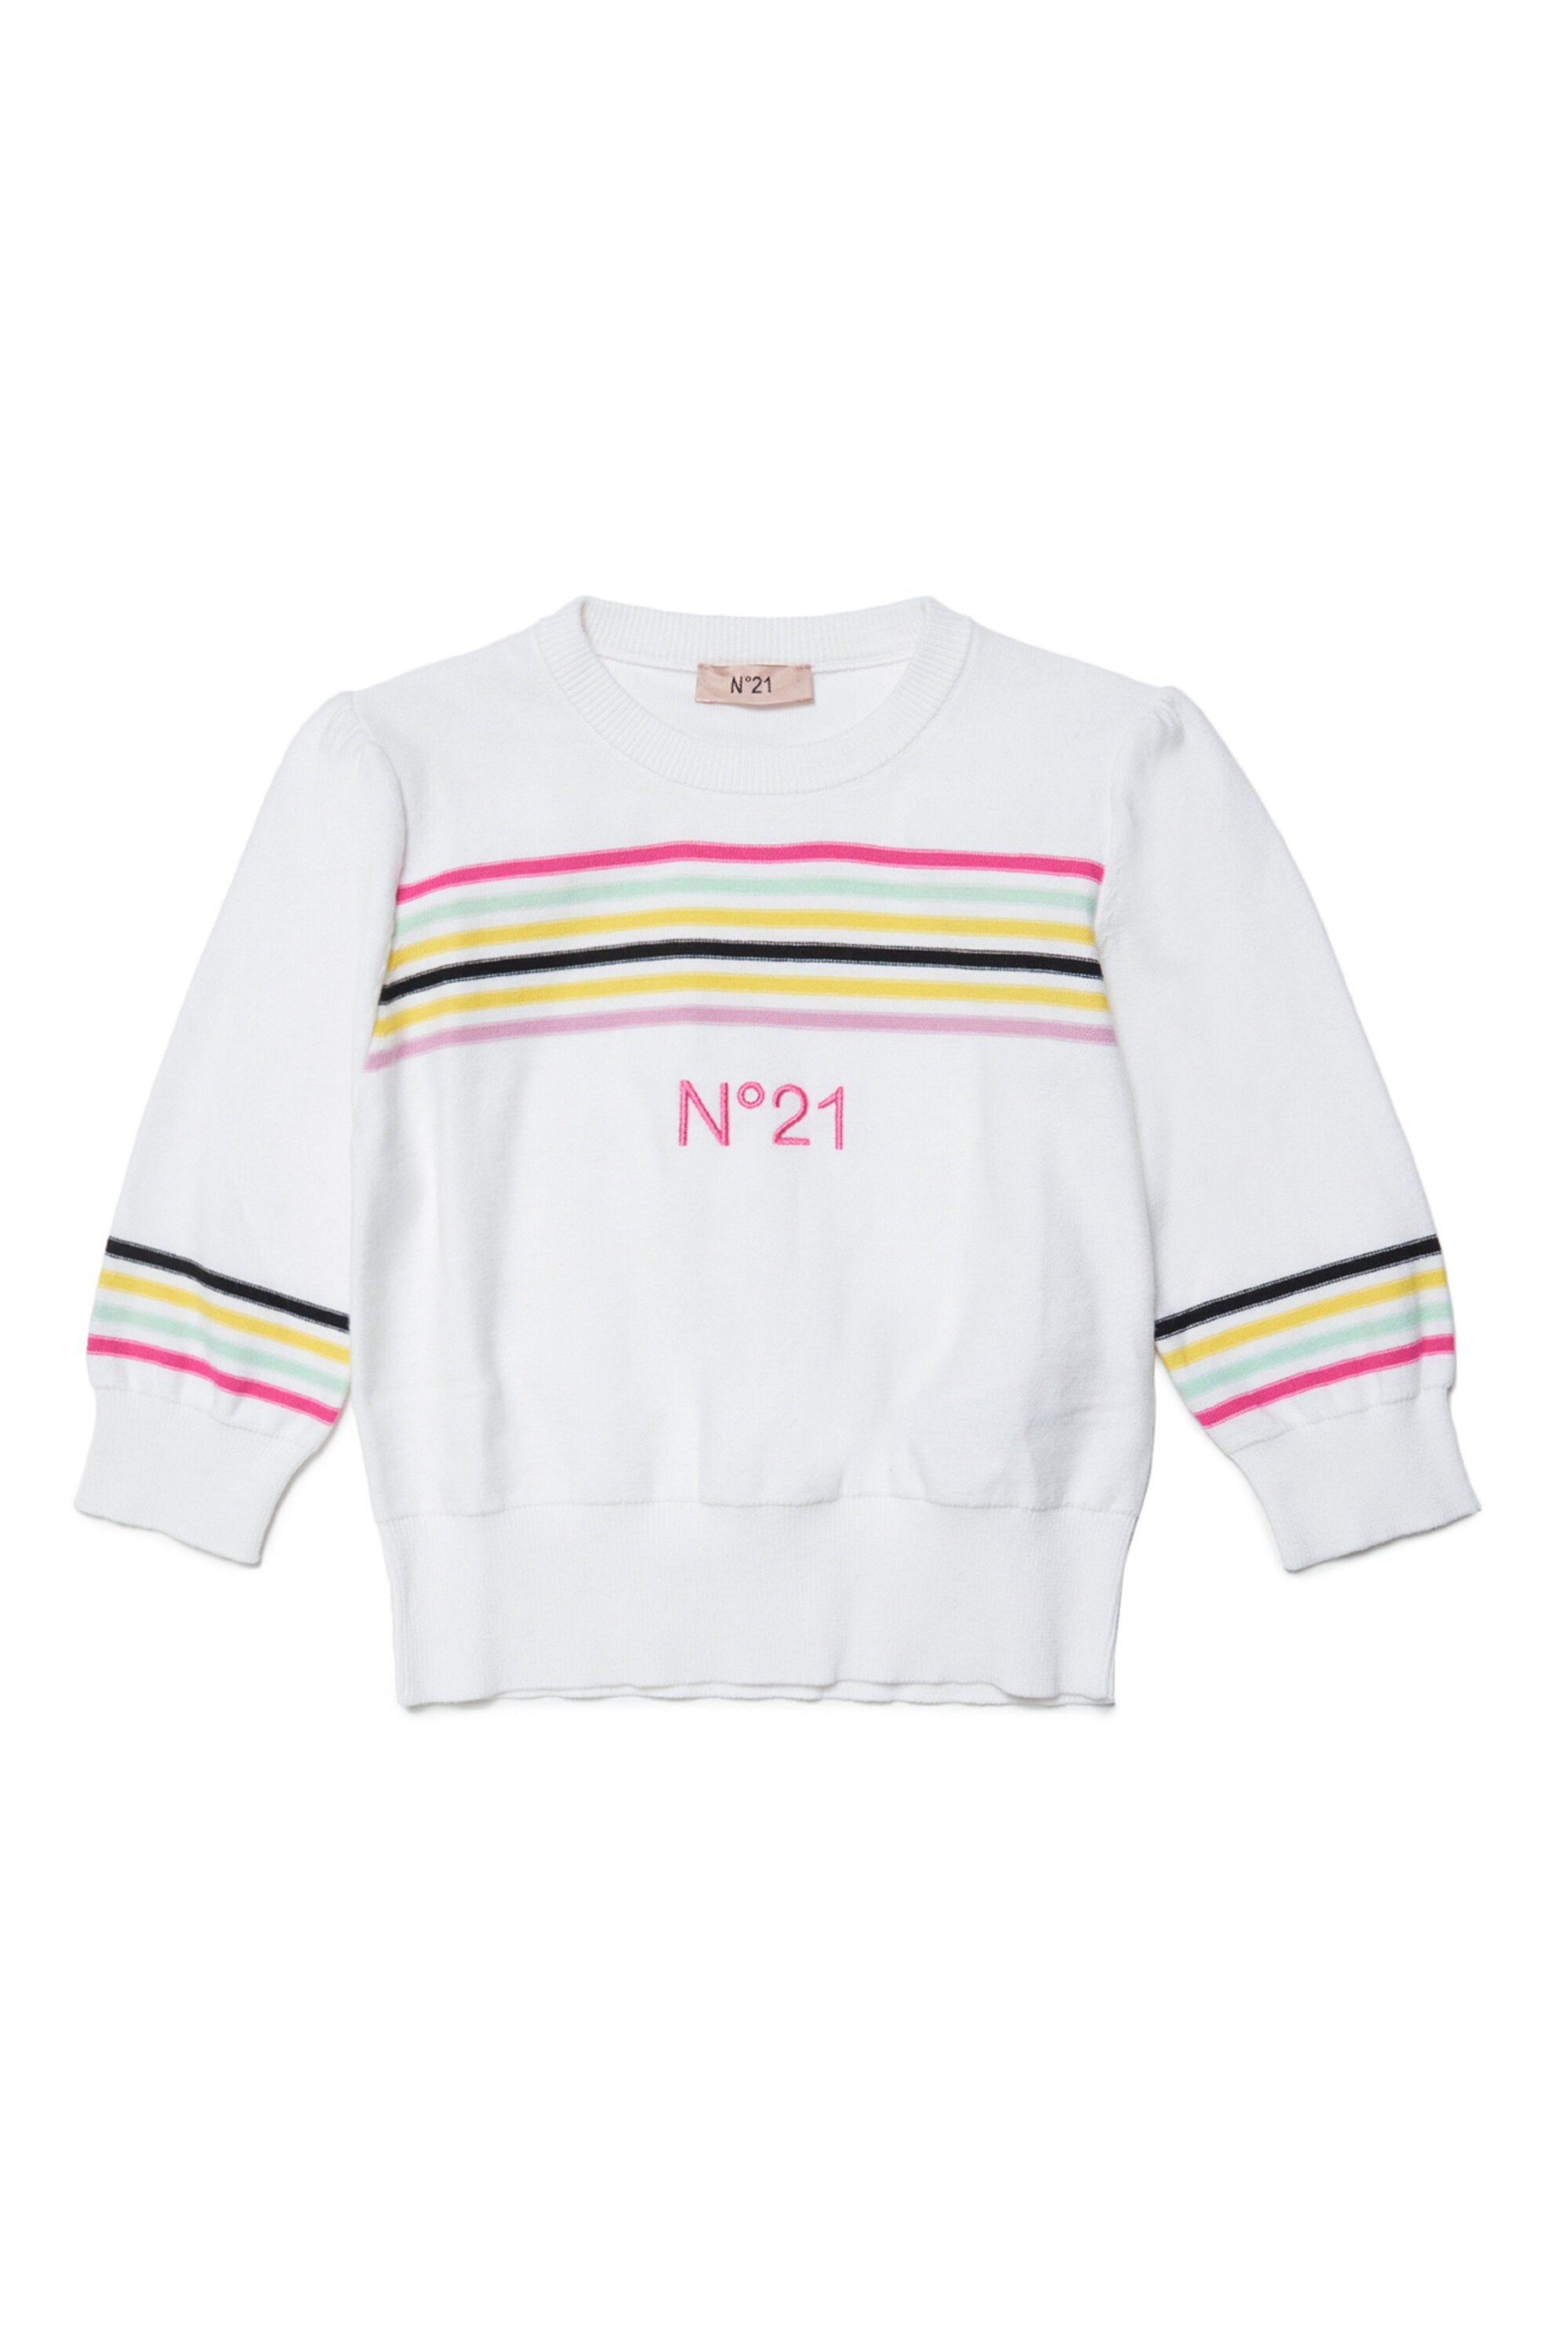 White half-sleeved t-shirt with multicoloured stripes and embroidered logo